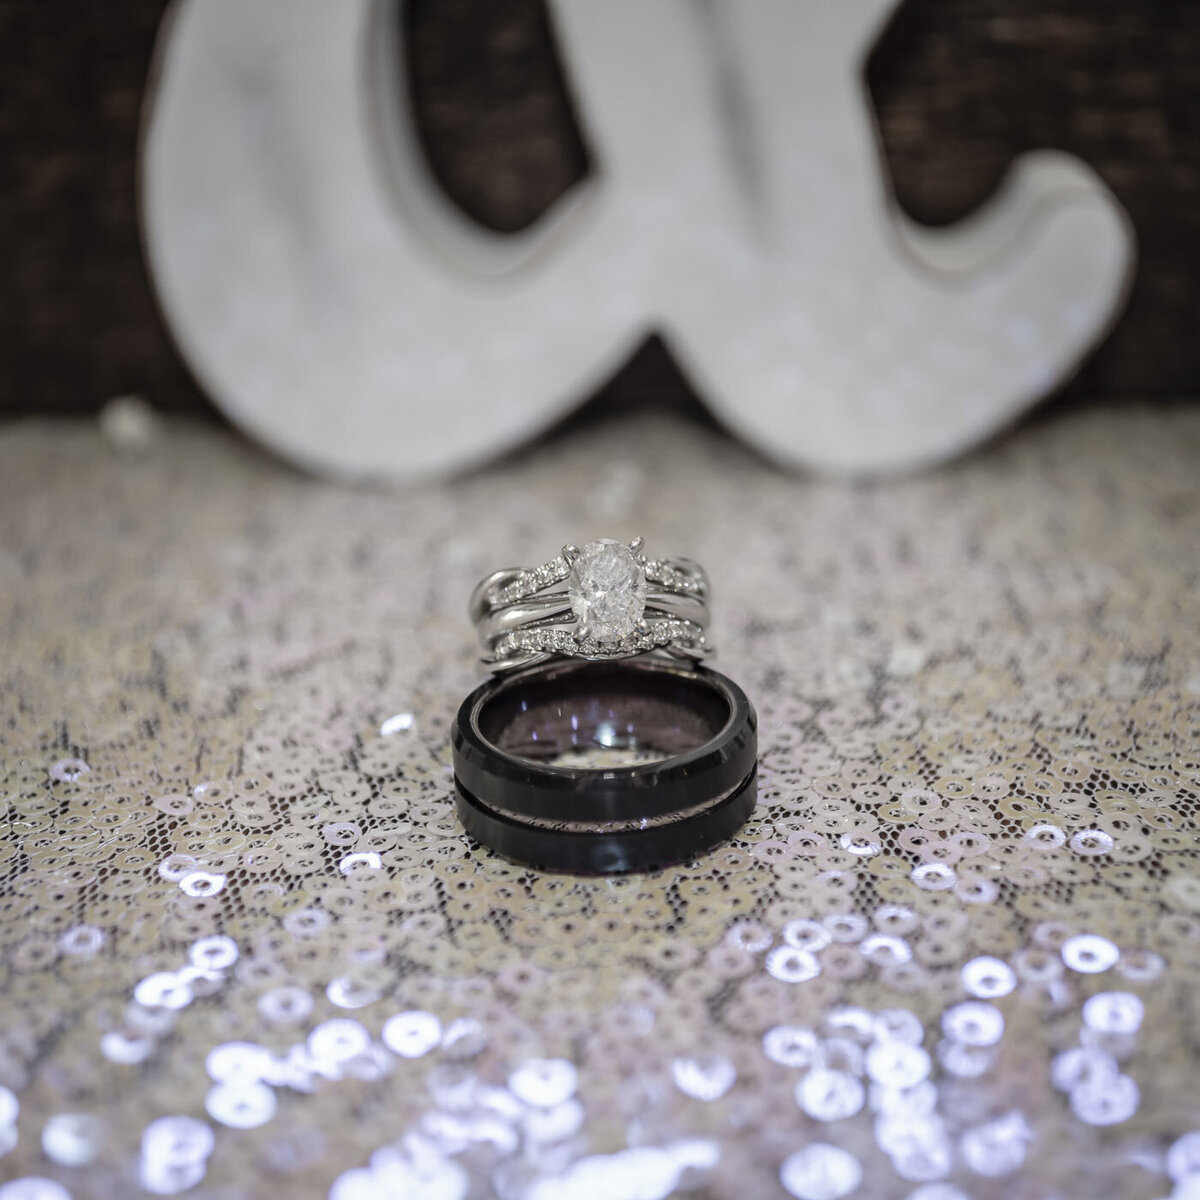 A detail photograph of the wedding rings on a glitter table cloth.